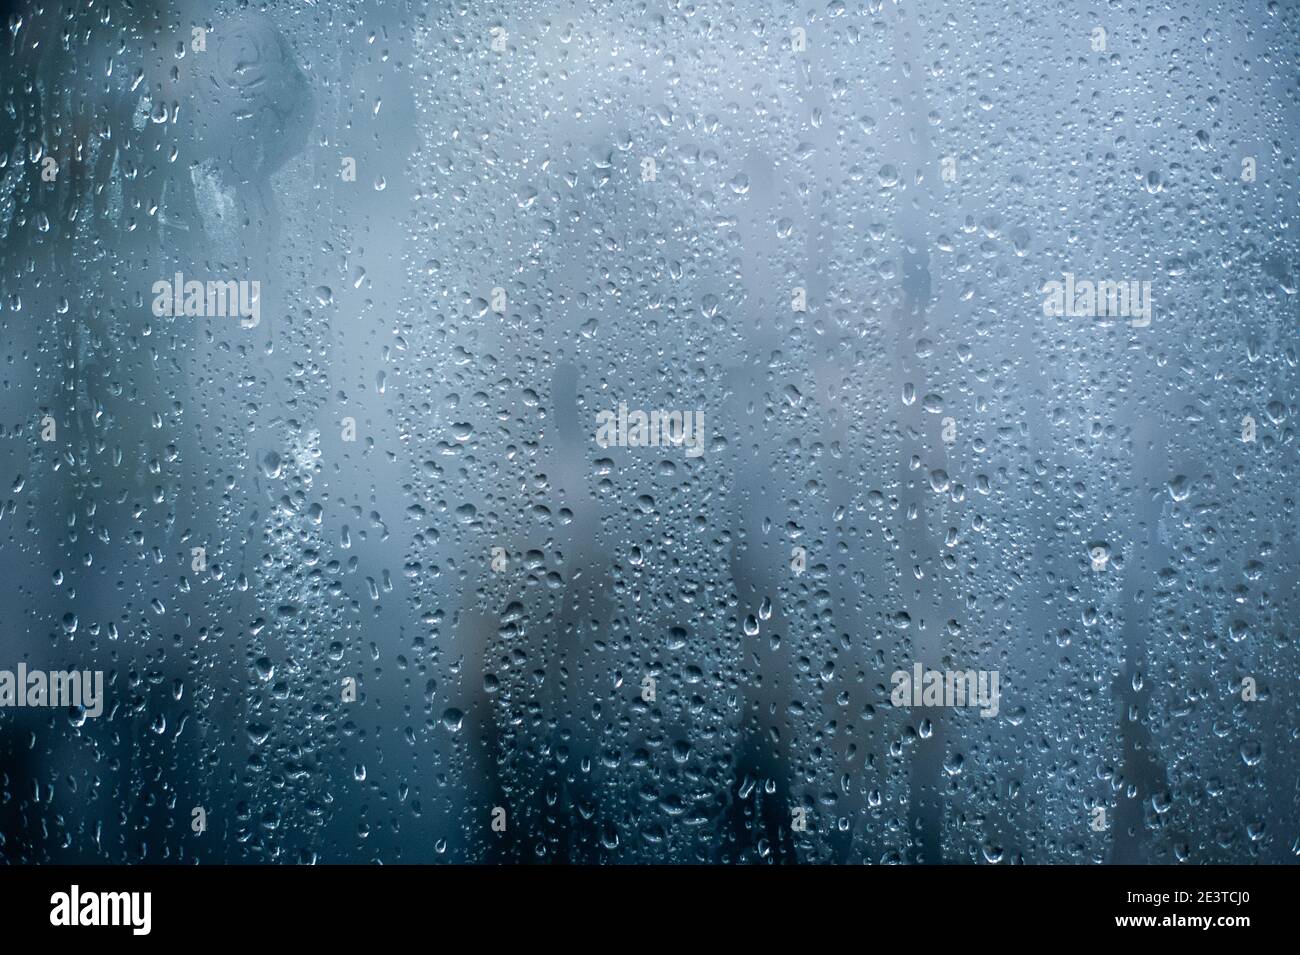 Rainy background, rain water drops on the window or in shower stall, autumn season backdrop, abstract textured wallpaper Stock Photo